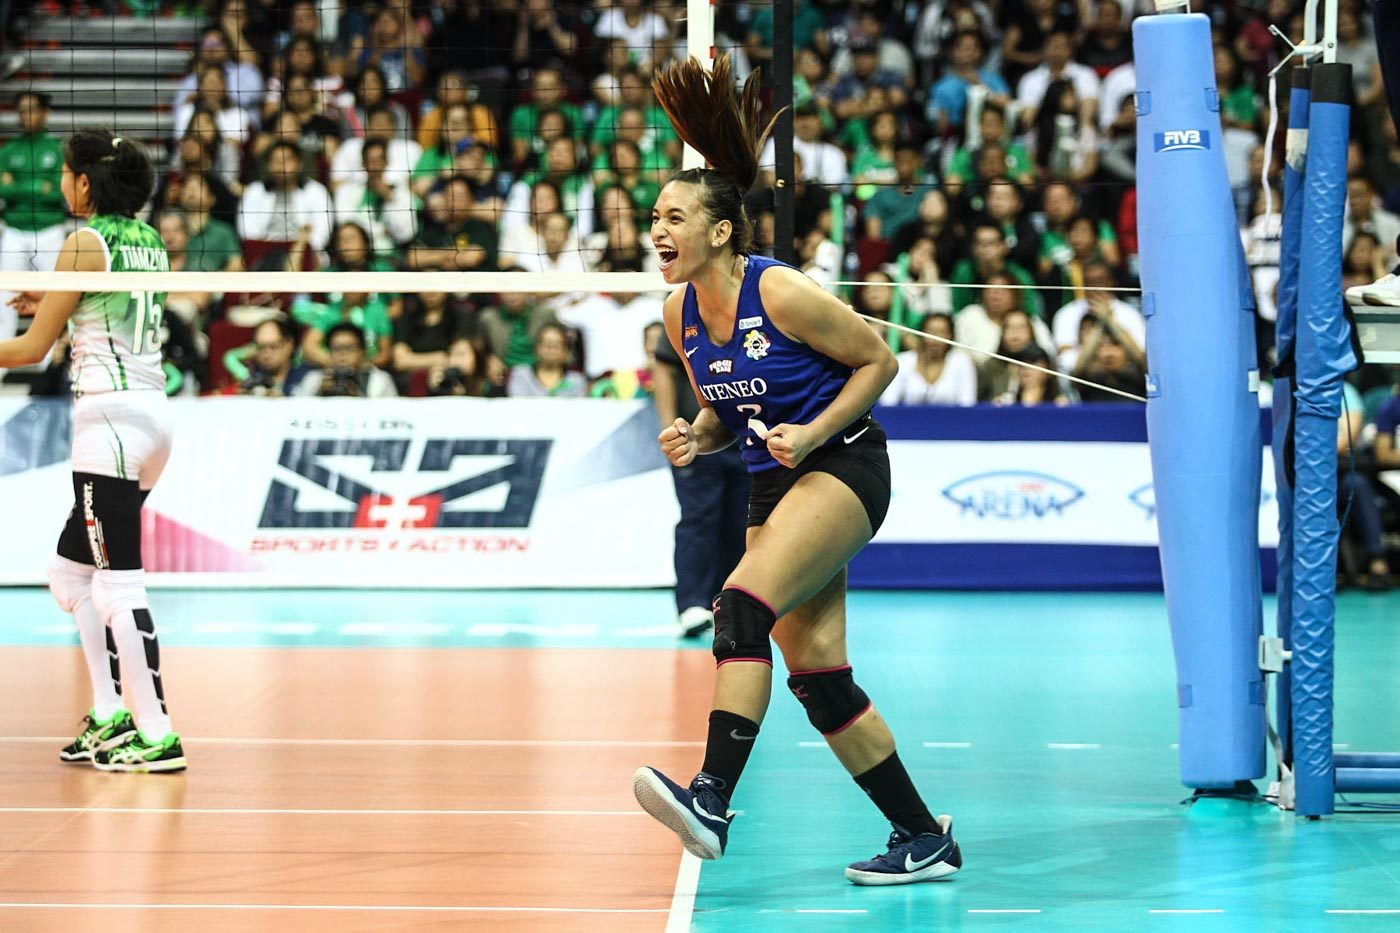 Michelle Morente posted a game-high 25 points from 20 excellent spikes, 3 blocks and 2 service points. Photo by Josh Albelda/Rappler  